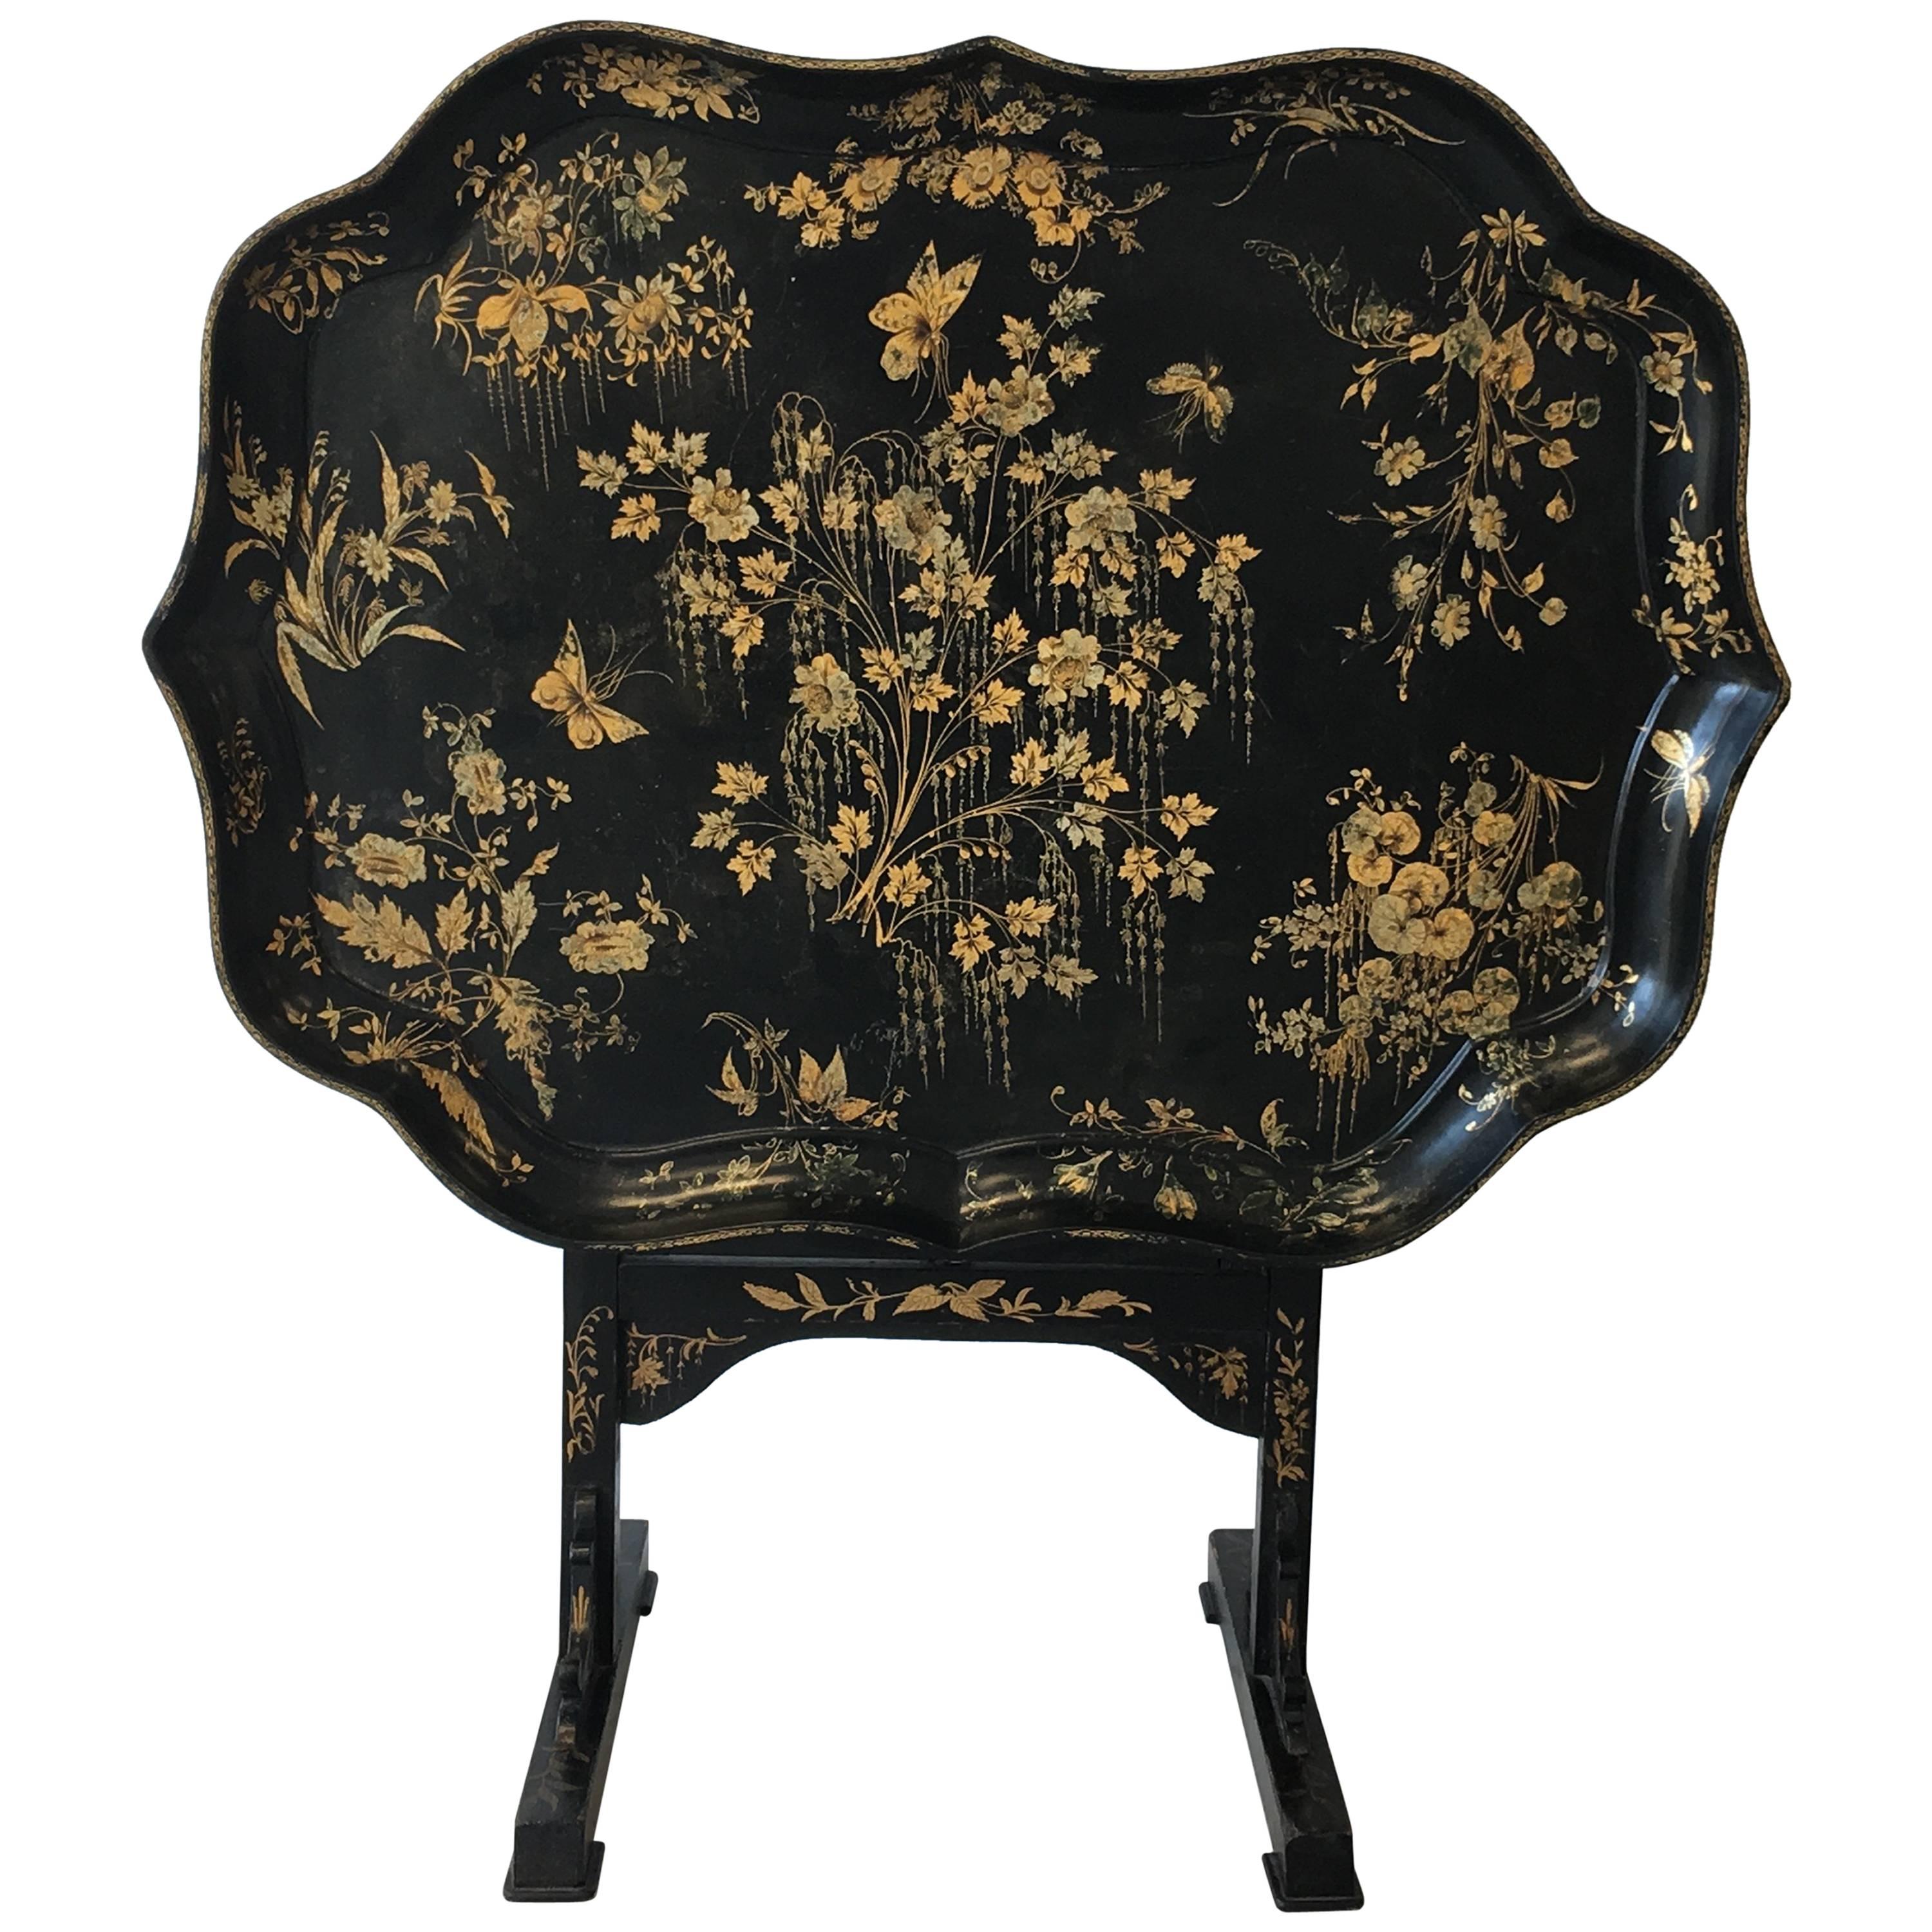 19th Century Japanned Black and Gold Lacquered Tilt-Top Table